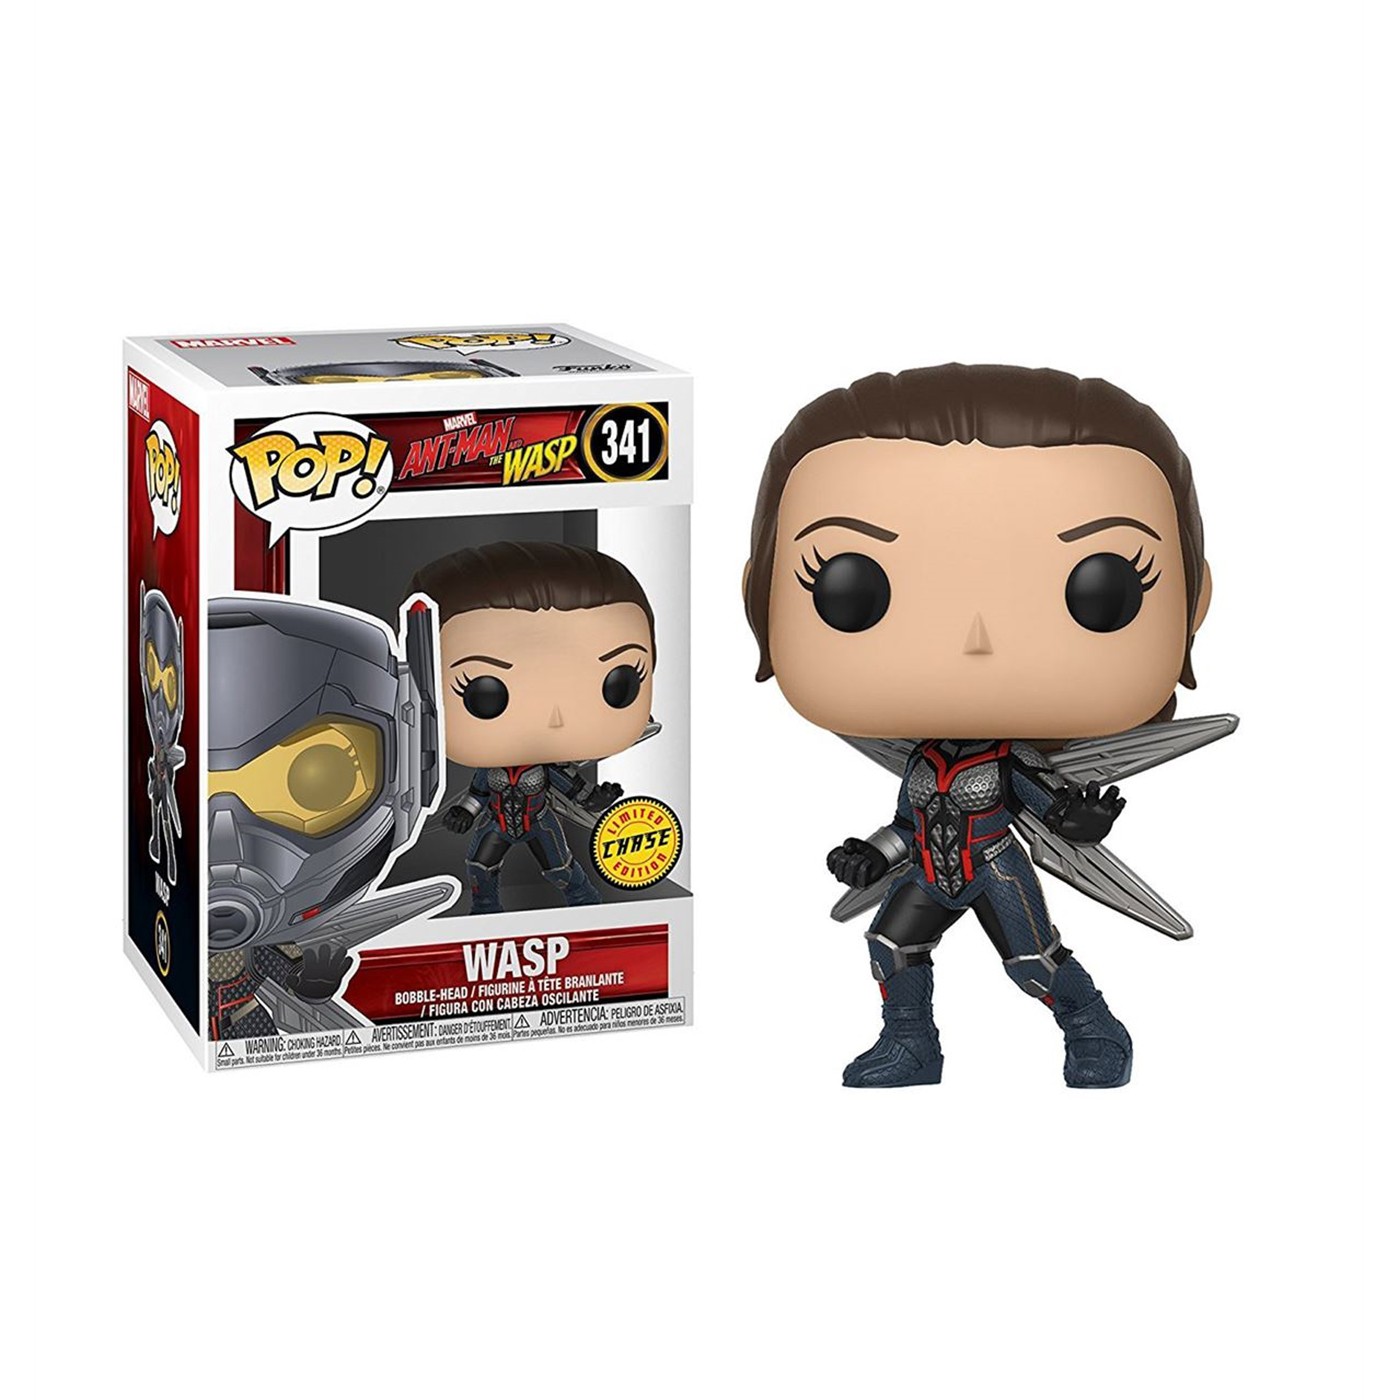 Ant-Man & The Wasp "Wasp" Funko Chase Pop Bobble Head